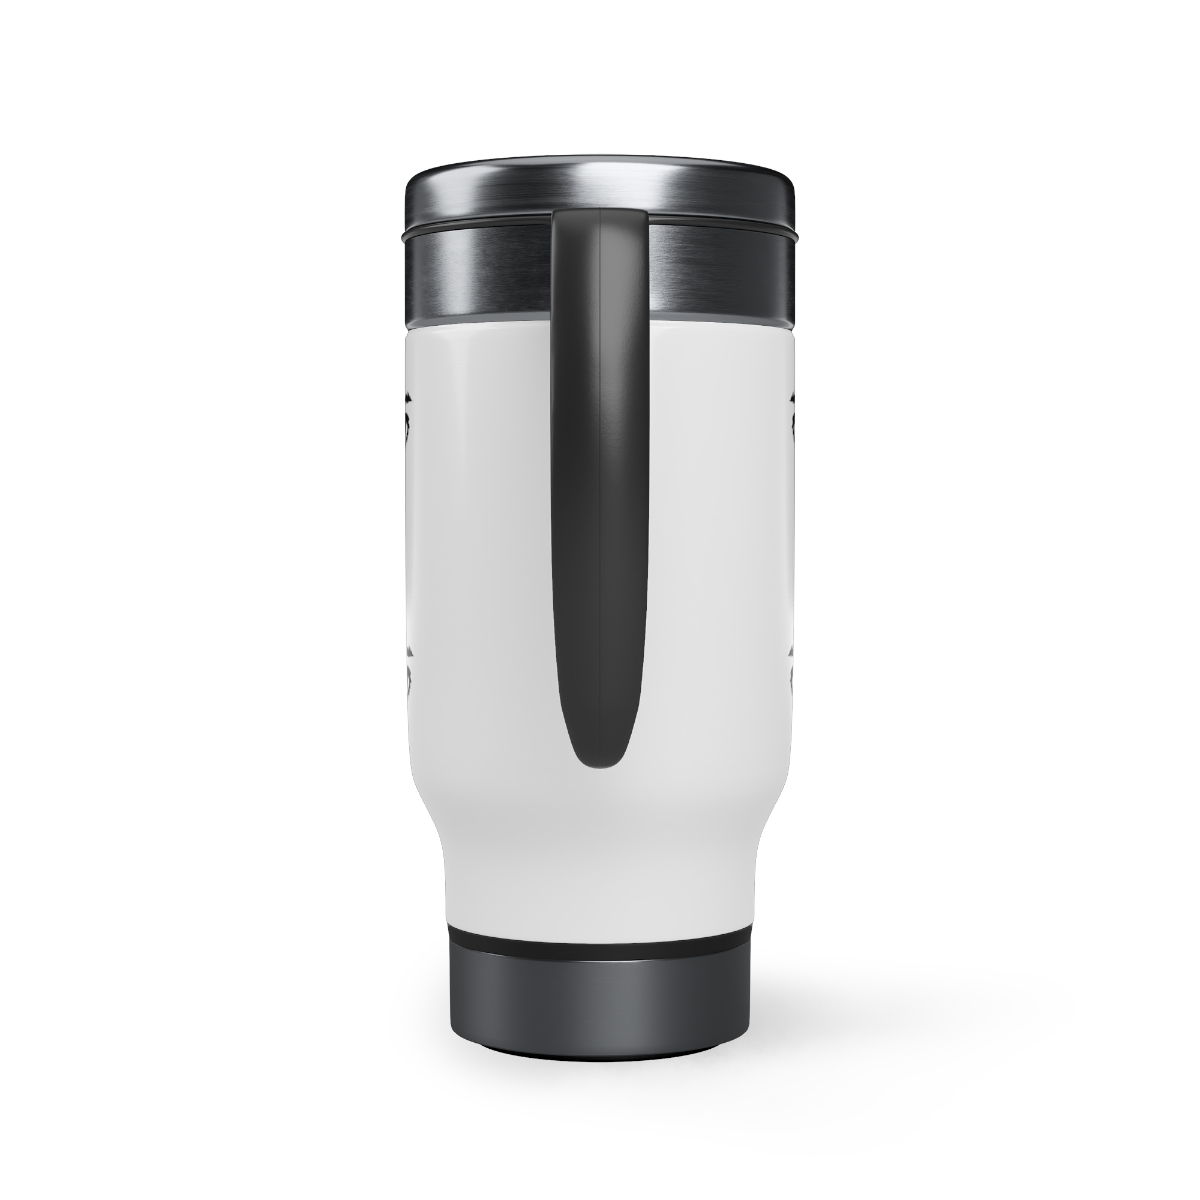 "Eye See You" Stainless Steel Travel Mug with Handle, 14oz product thumbnail image